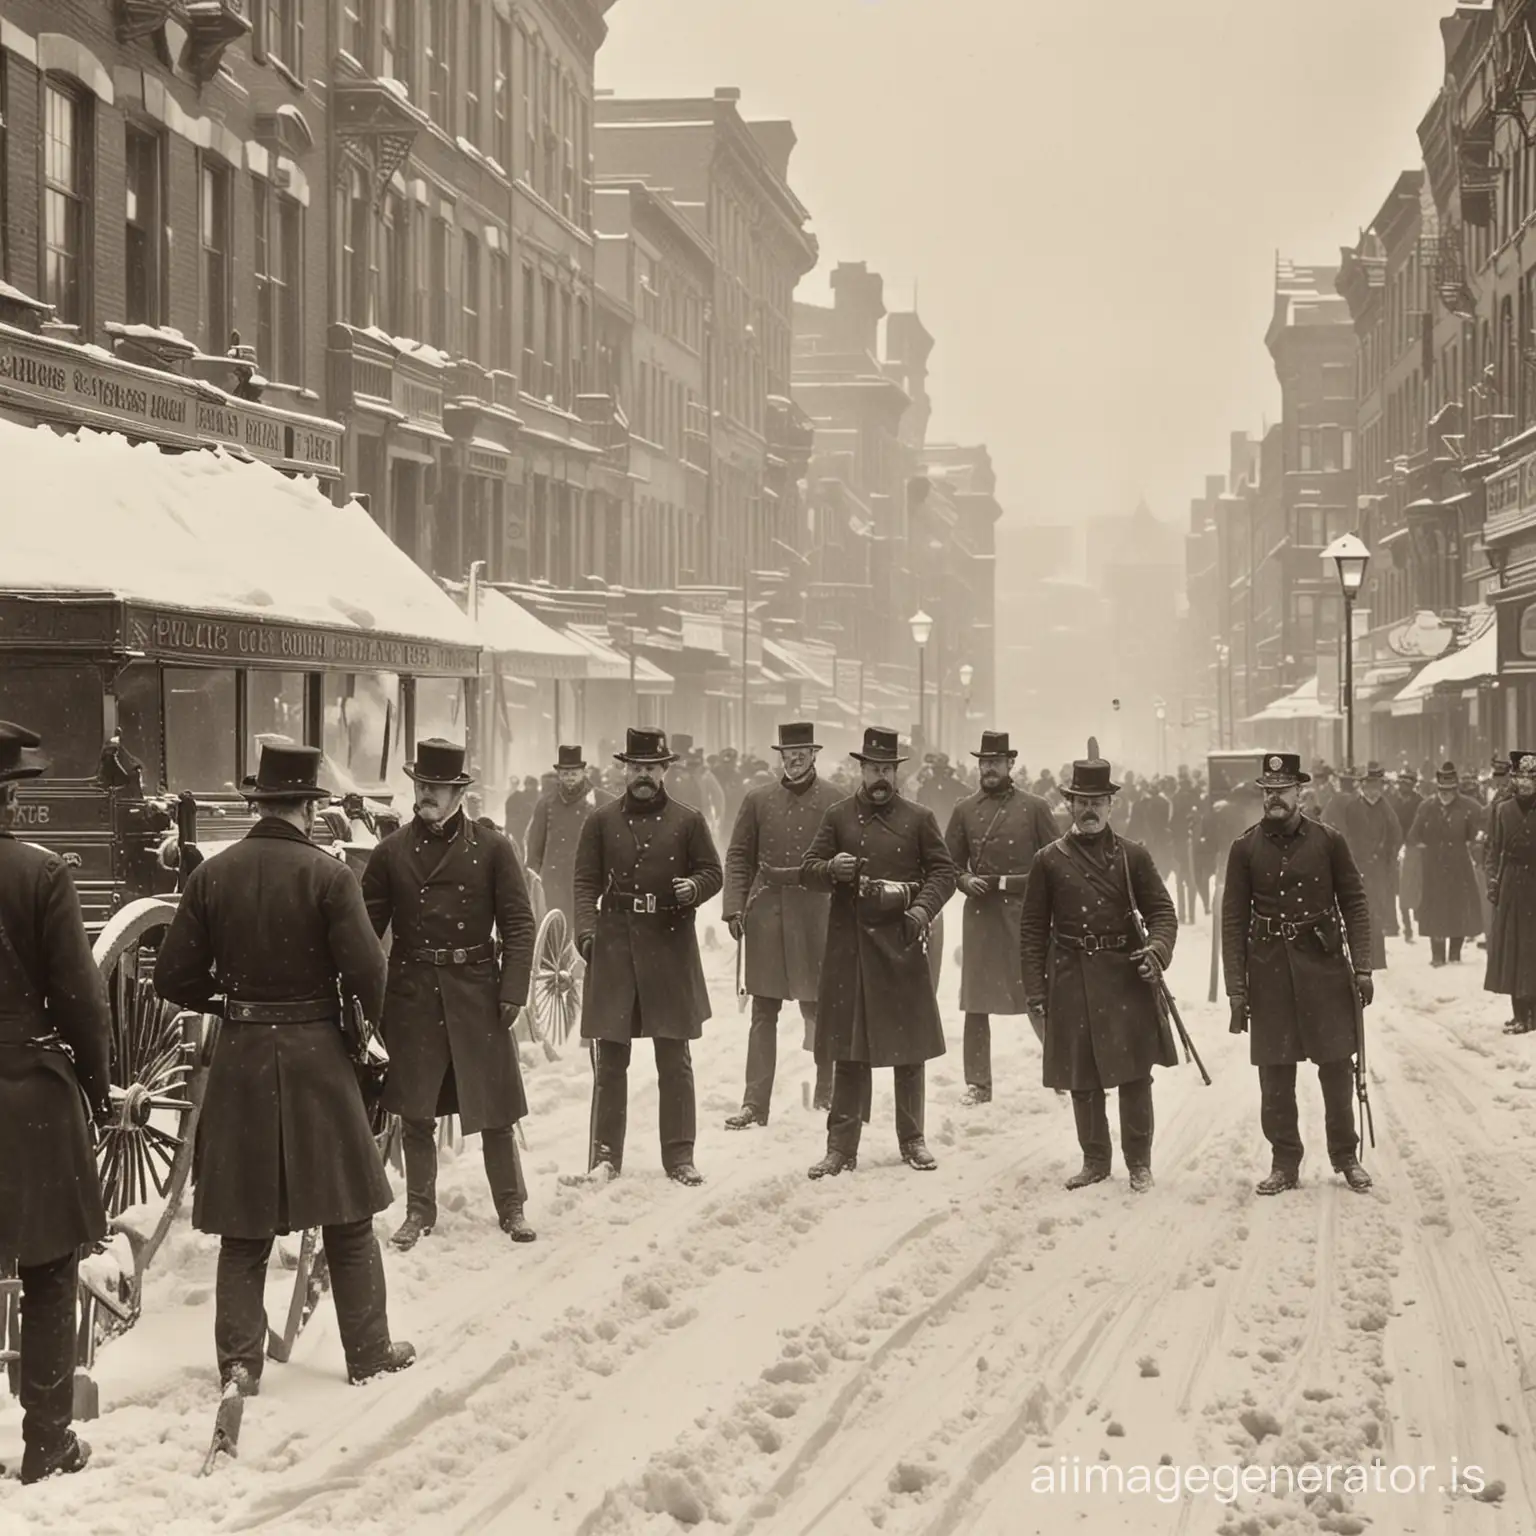 Historic-Blizzard-of-1888-Community-Aid-Amidst-Snowstorm-Chaos